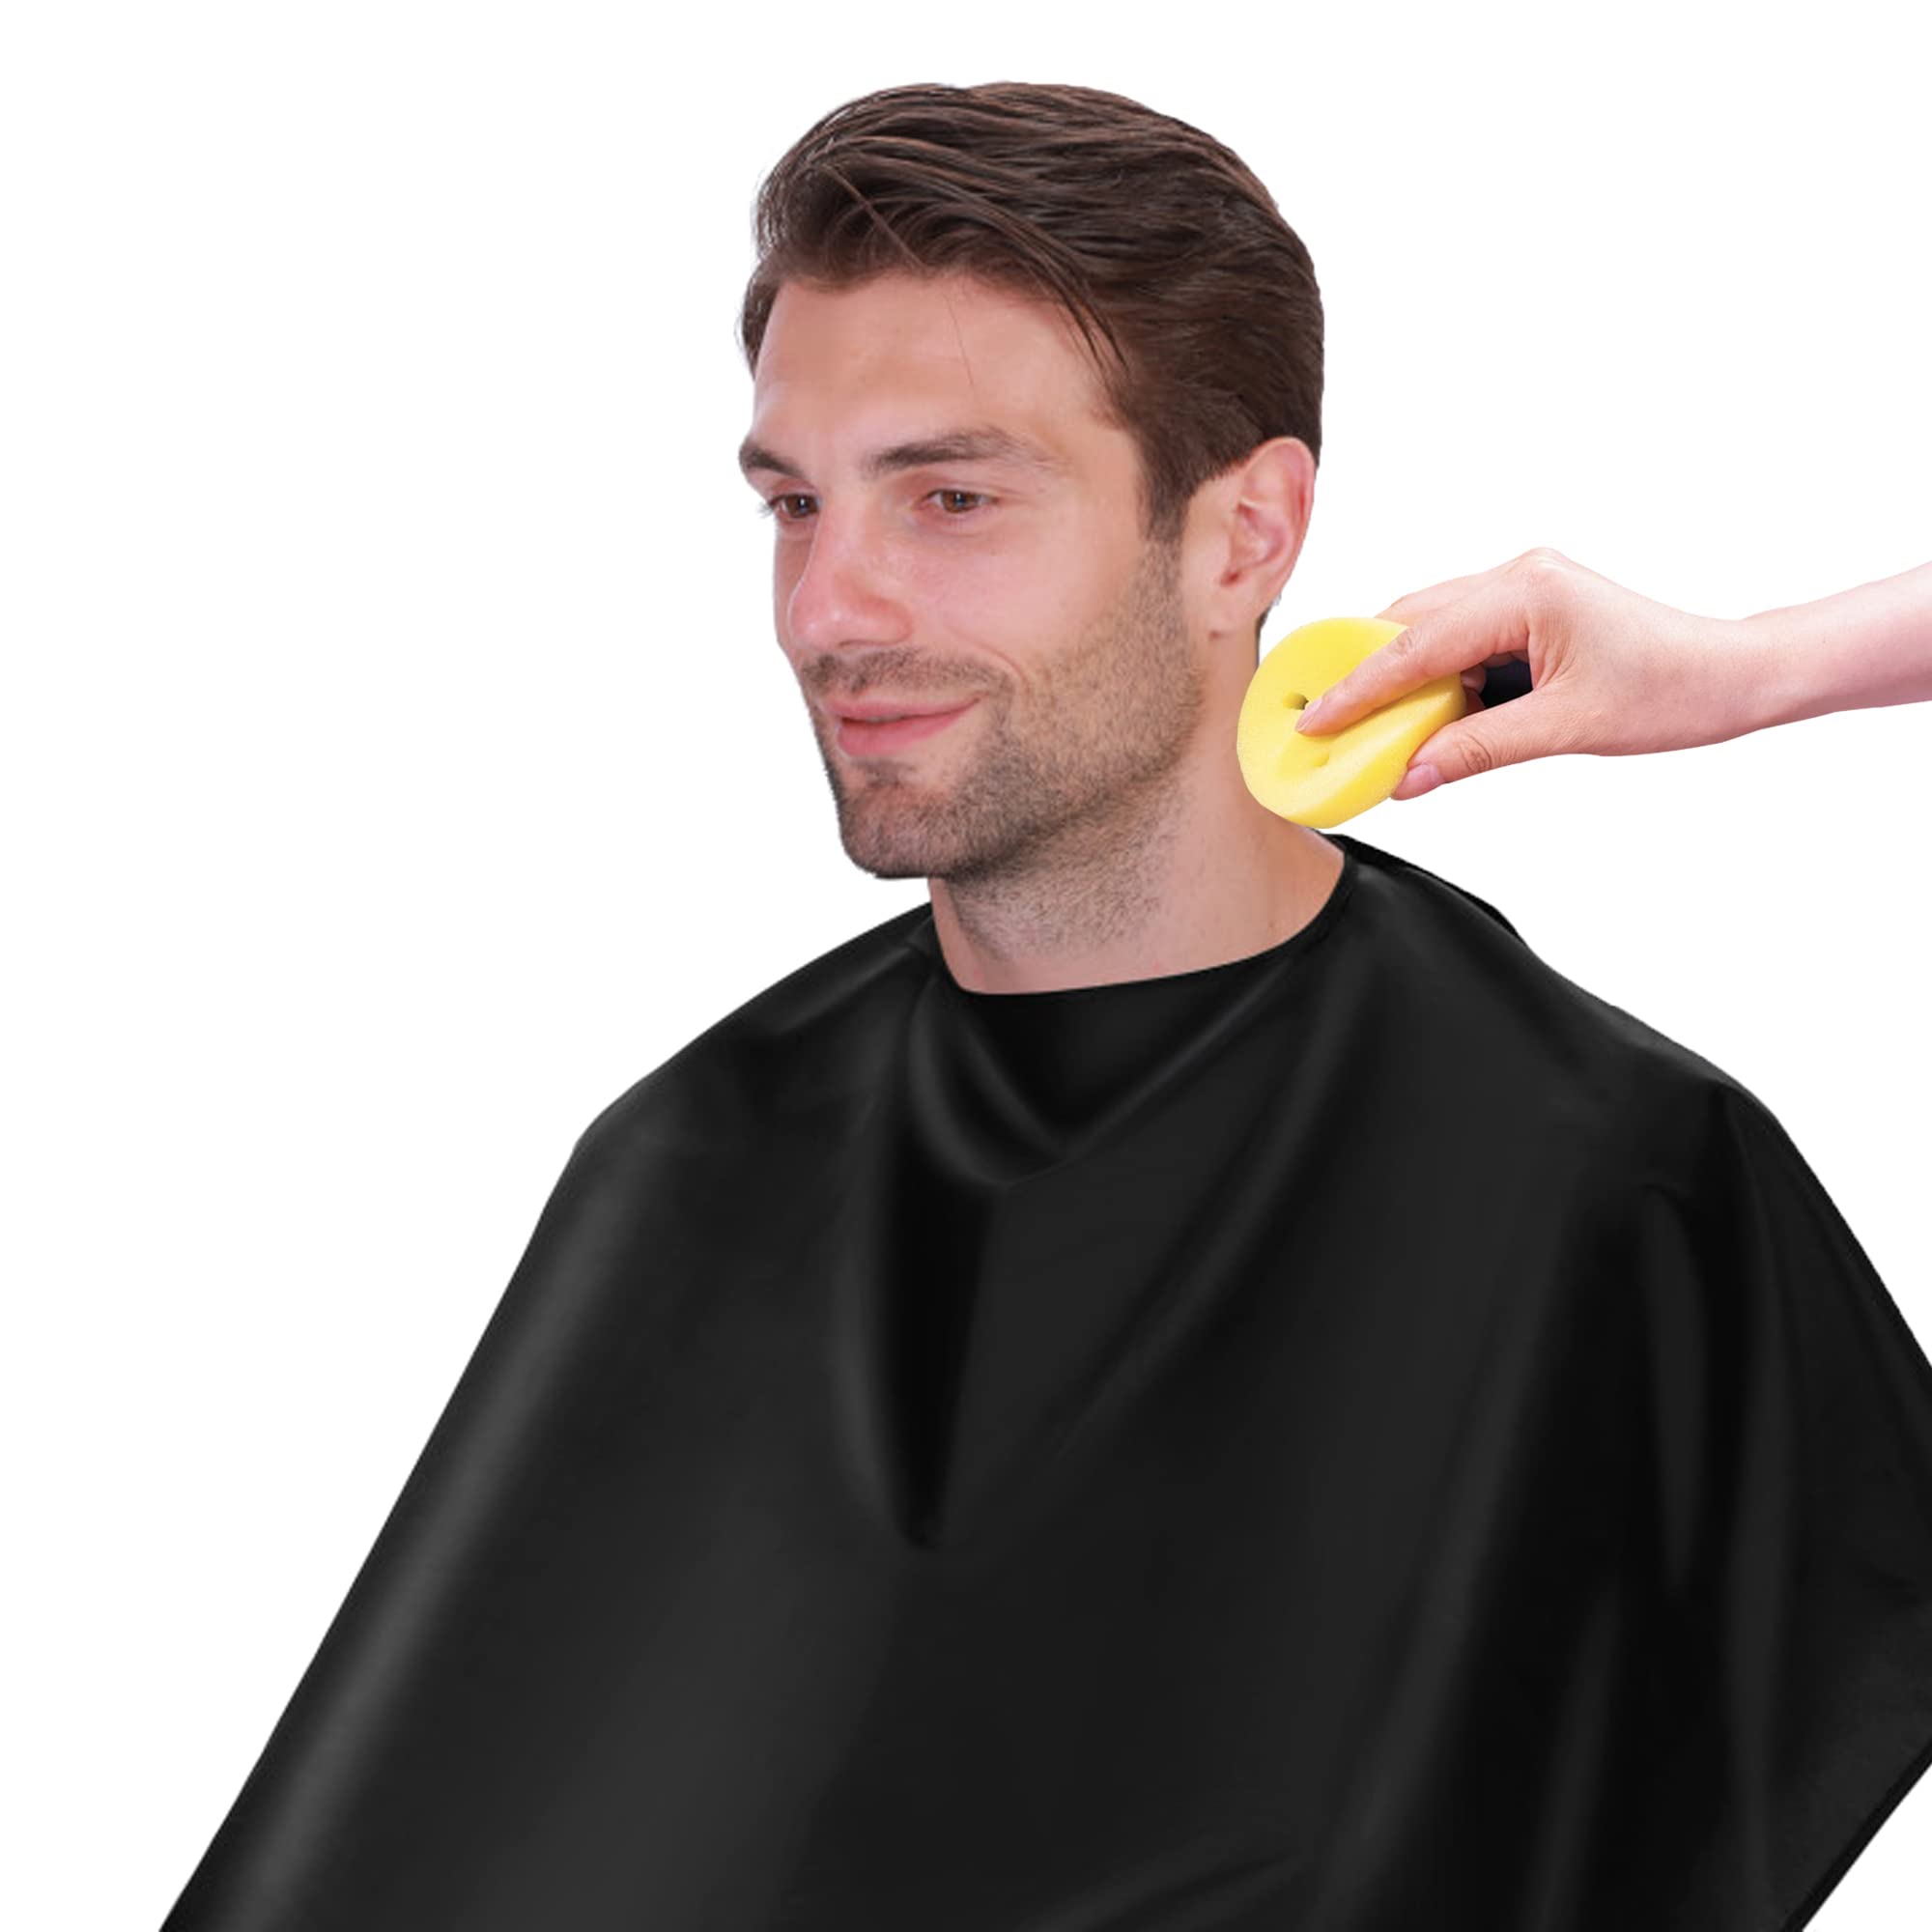 NOOA Waterproof Barber Cape - Haircut Cape for Men, Unisex Black Hair Cutting Cape with Adjustable Neck Size, 41.5 x 58 inches Hairdresser Cape for Hair Treatment - Cutting/Coloring/Perming